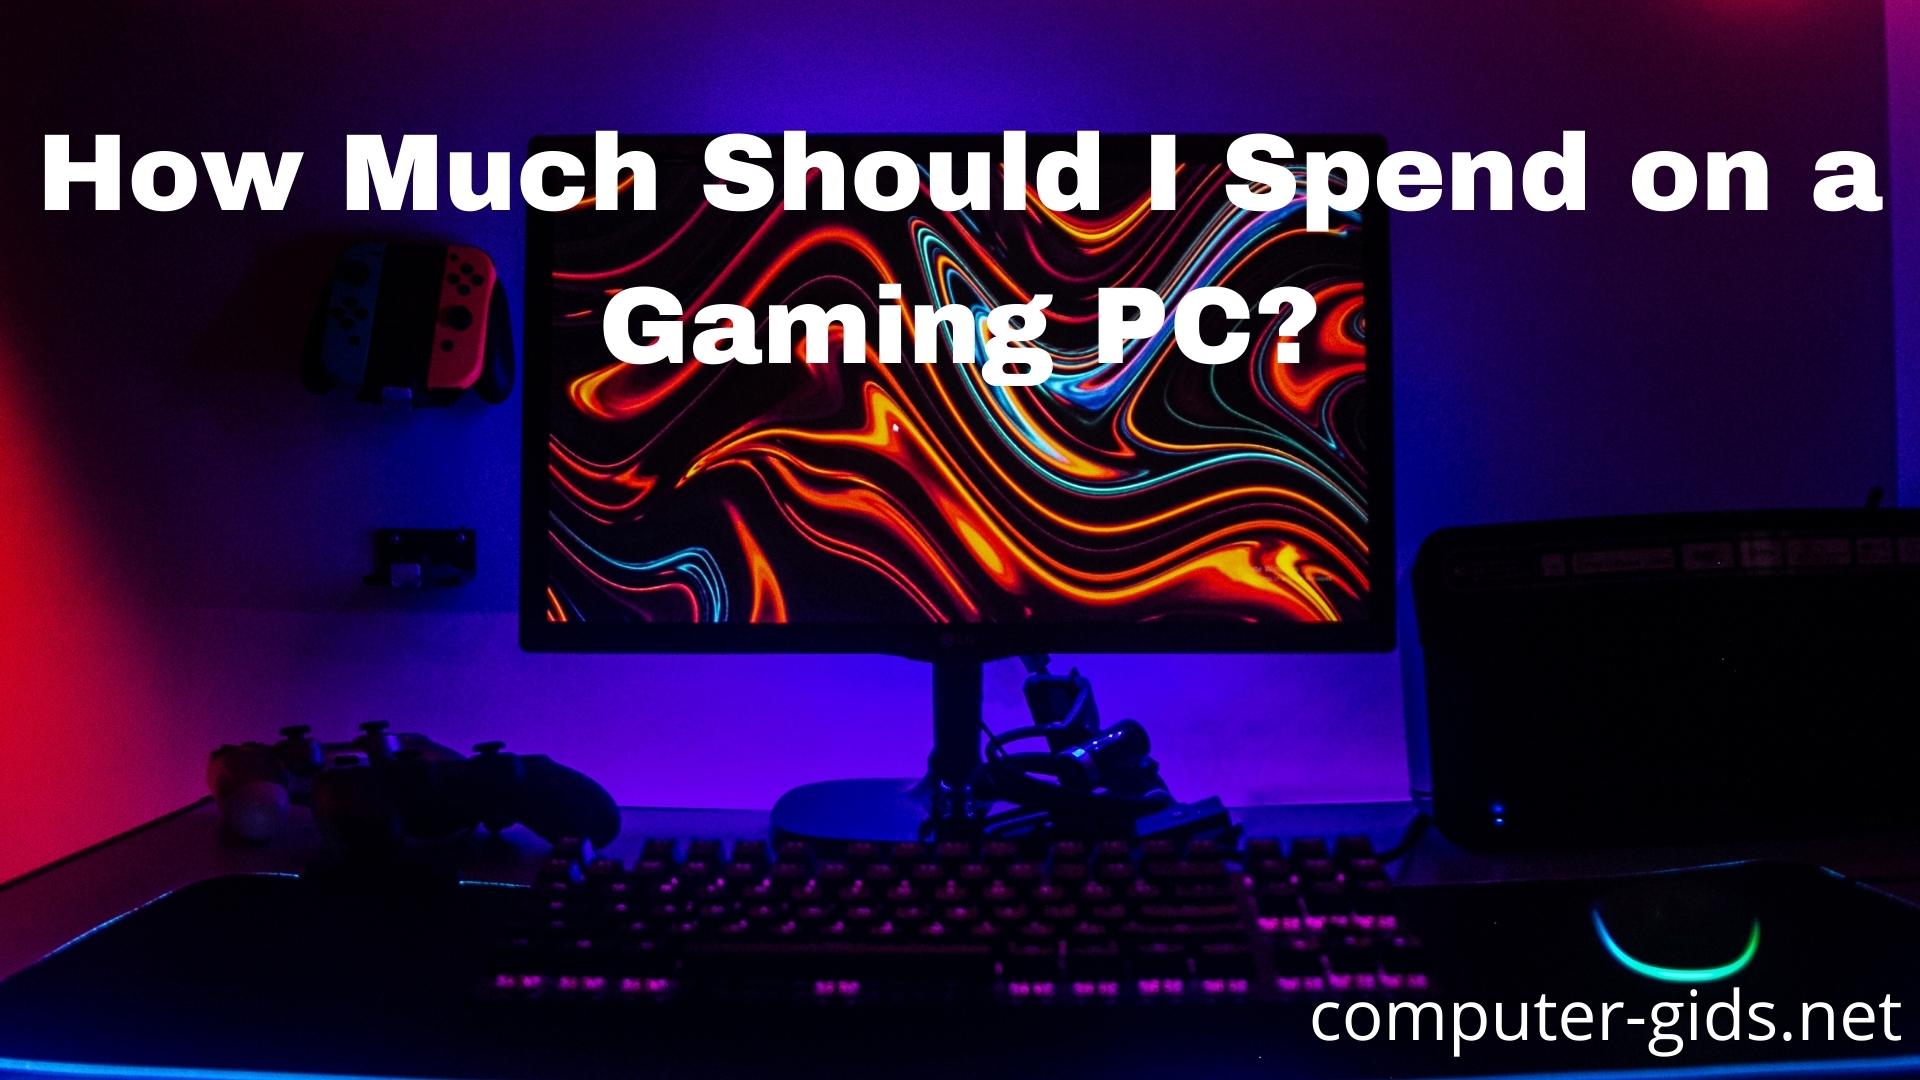 How Much Should I Spend on a Gaming PC